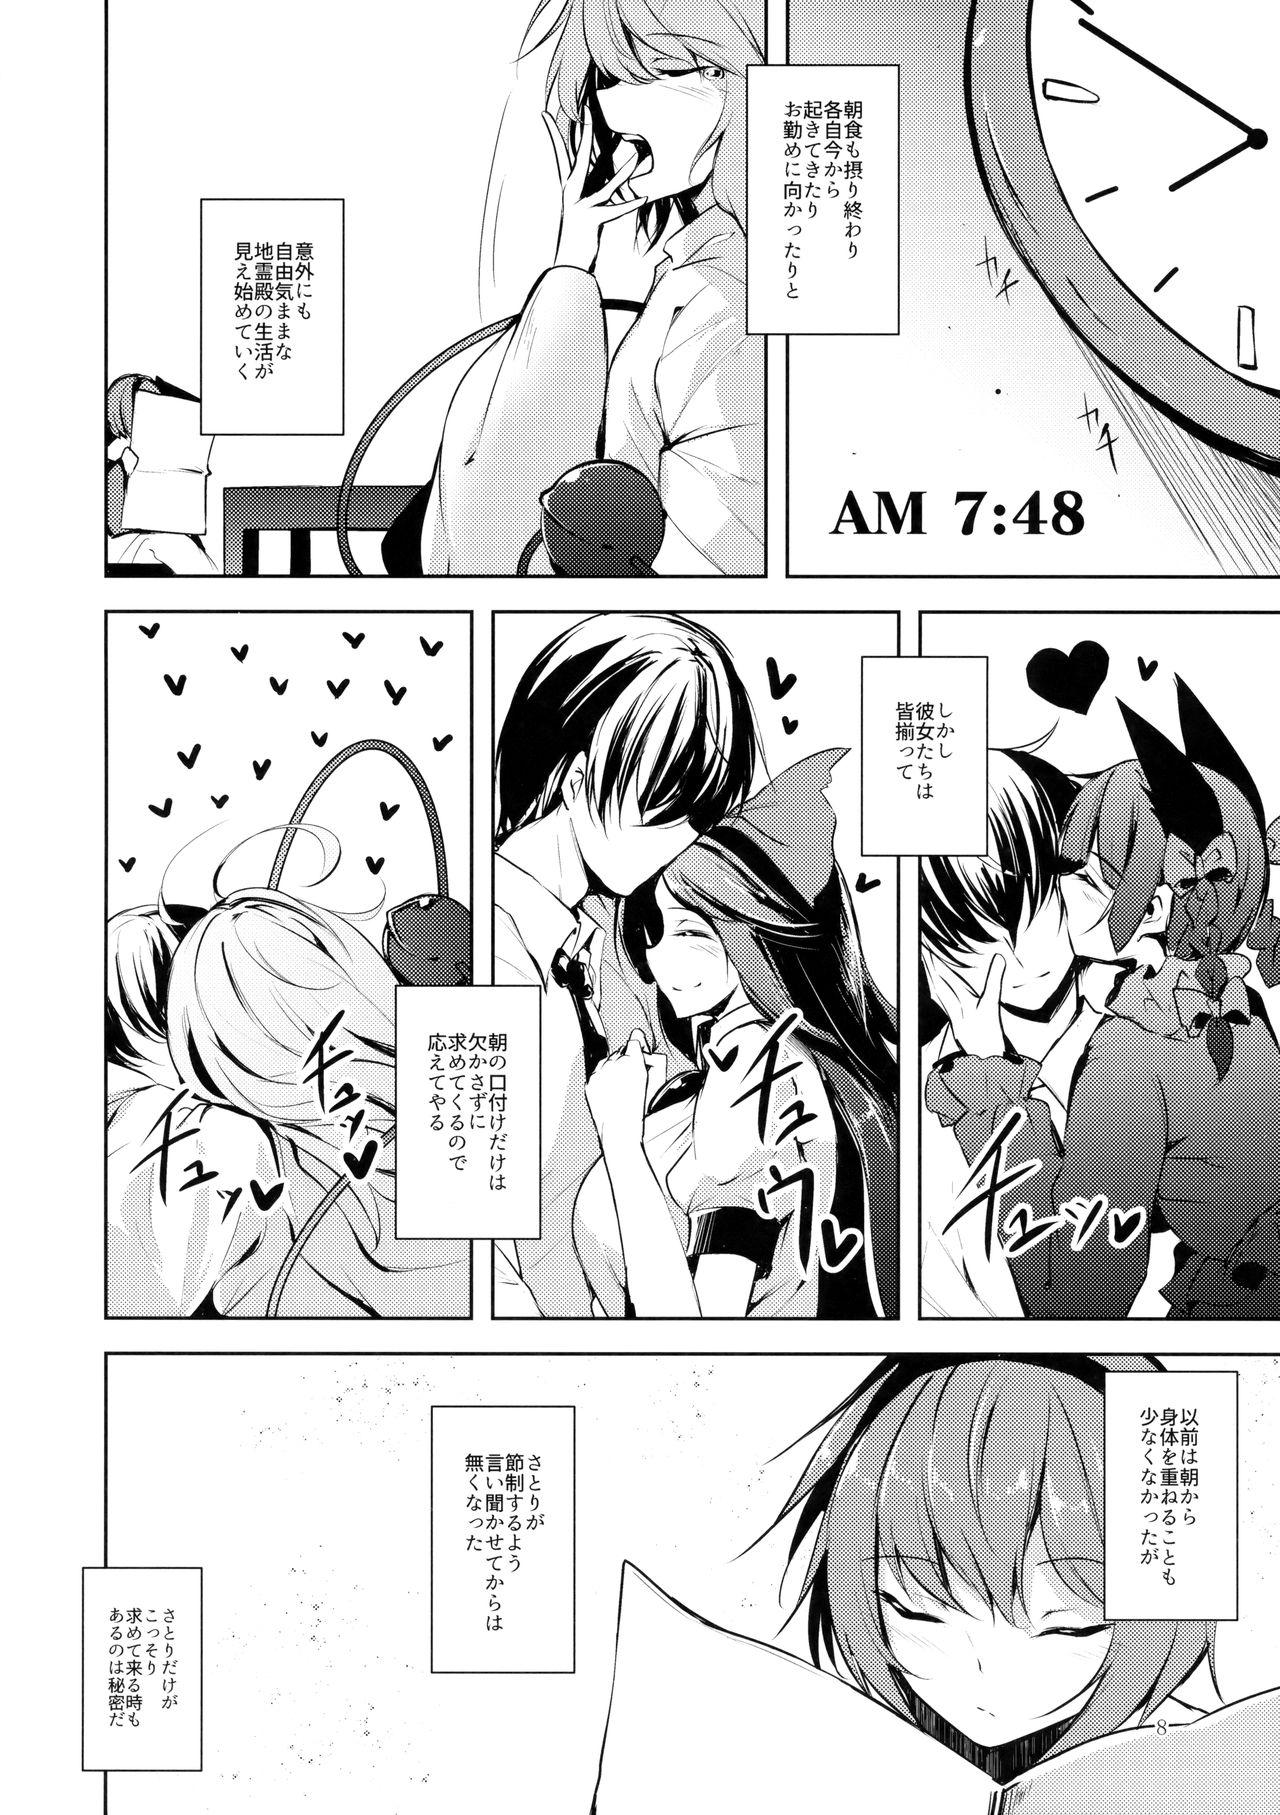 Funny Komeiji Schedule AM - Touhou project Caught - Page 9